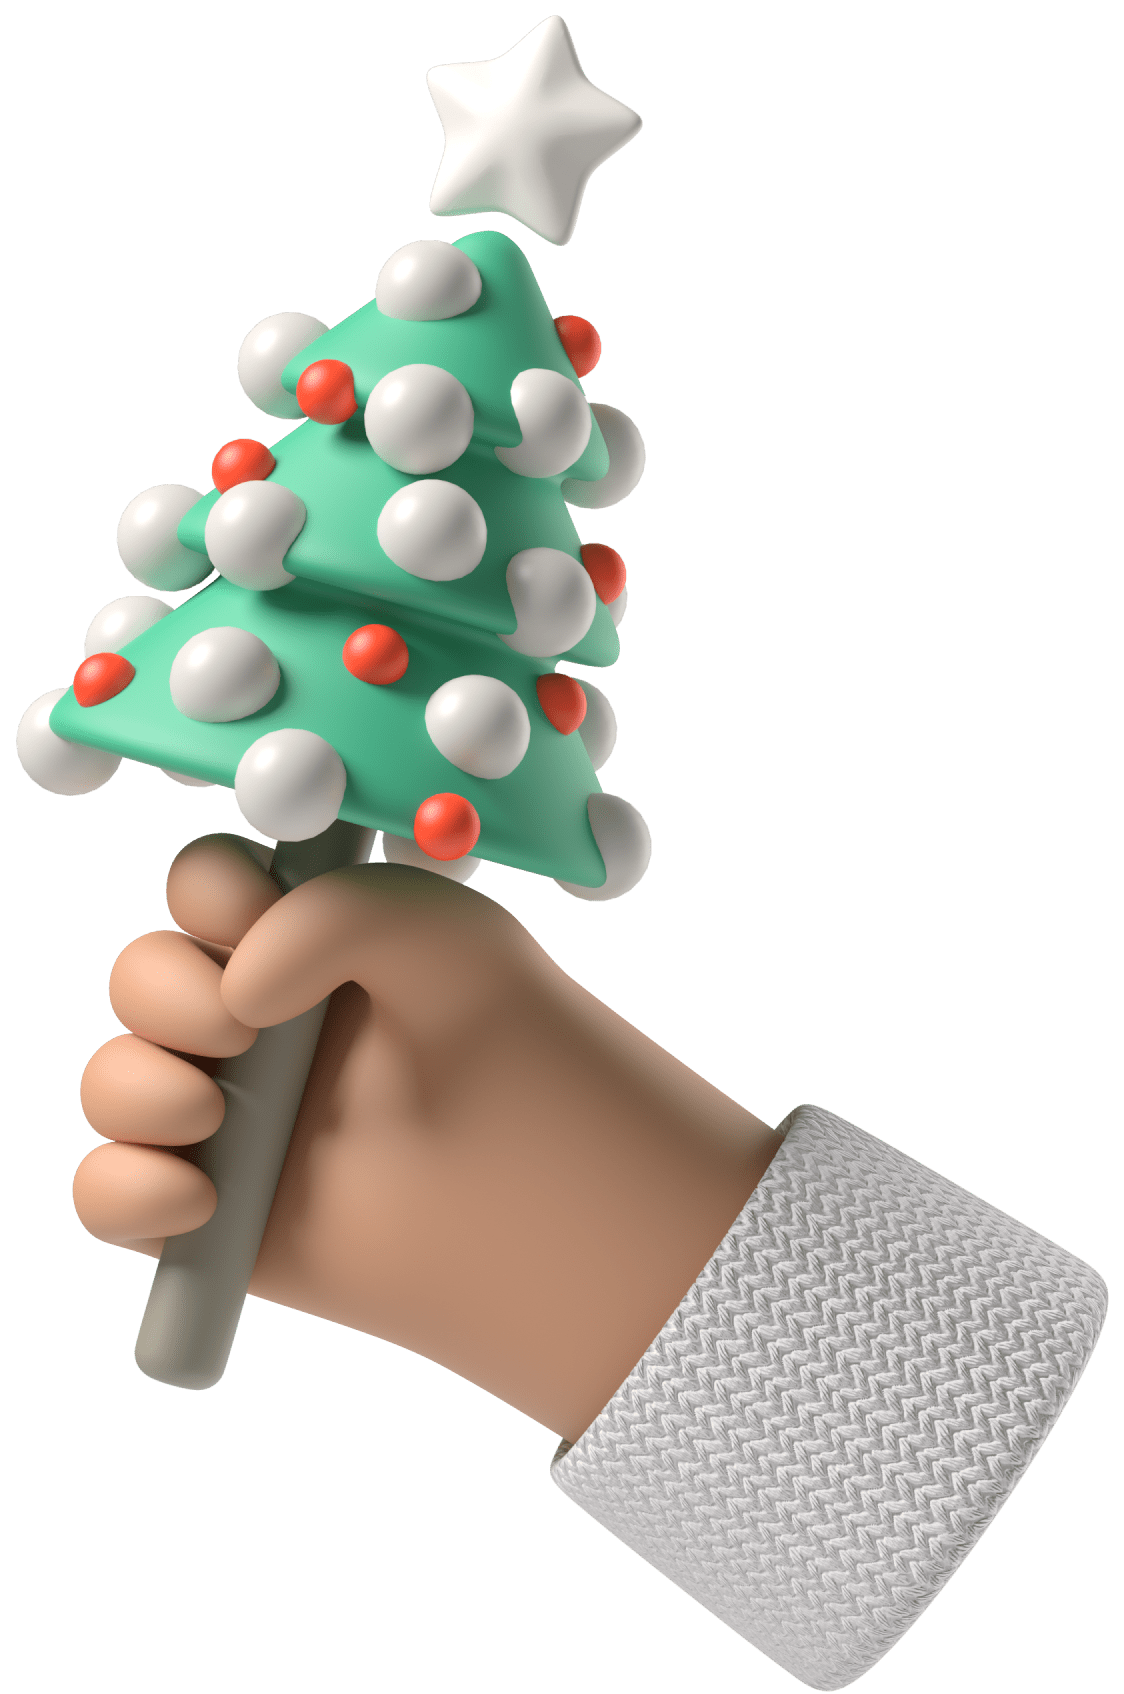 3D hand model with christmas tree